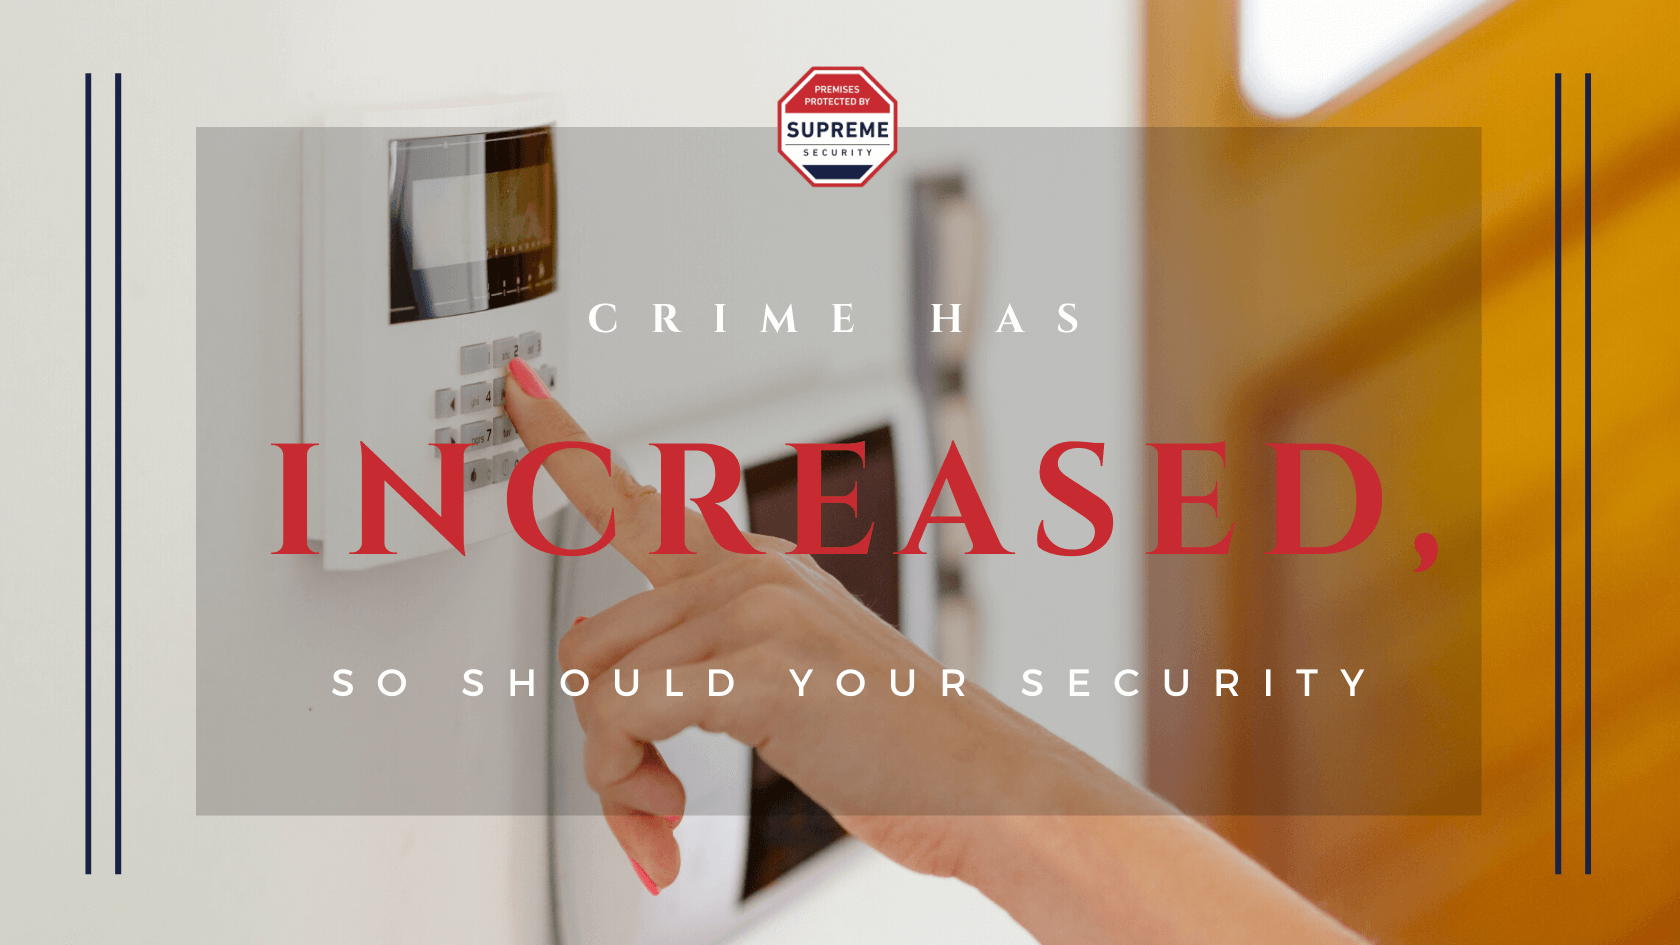 CRIME HAS INCREASED, SO SHOULD YOUR SECURITY